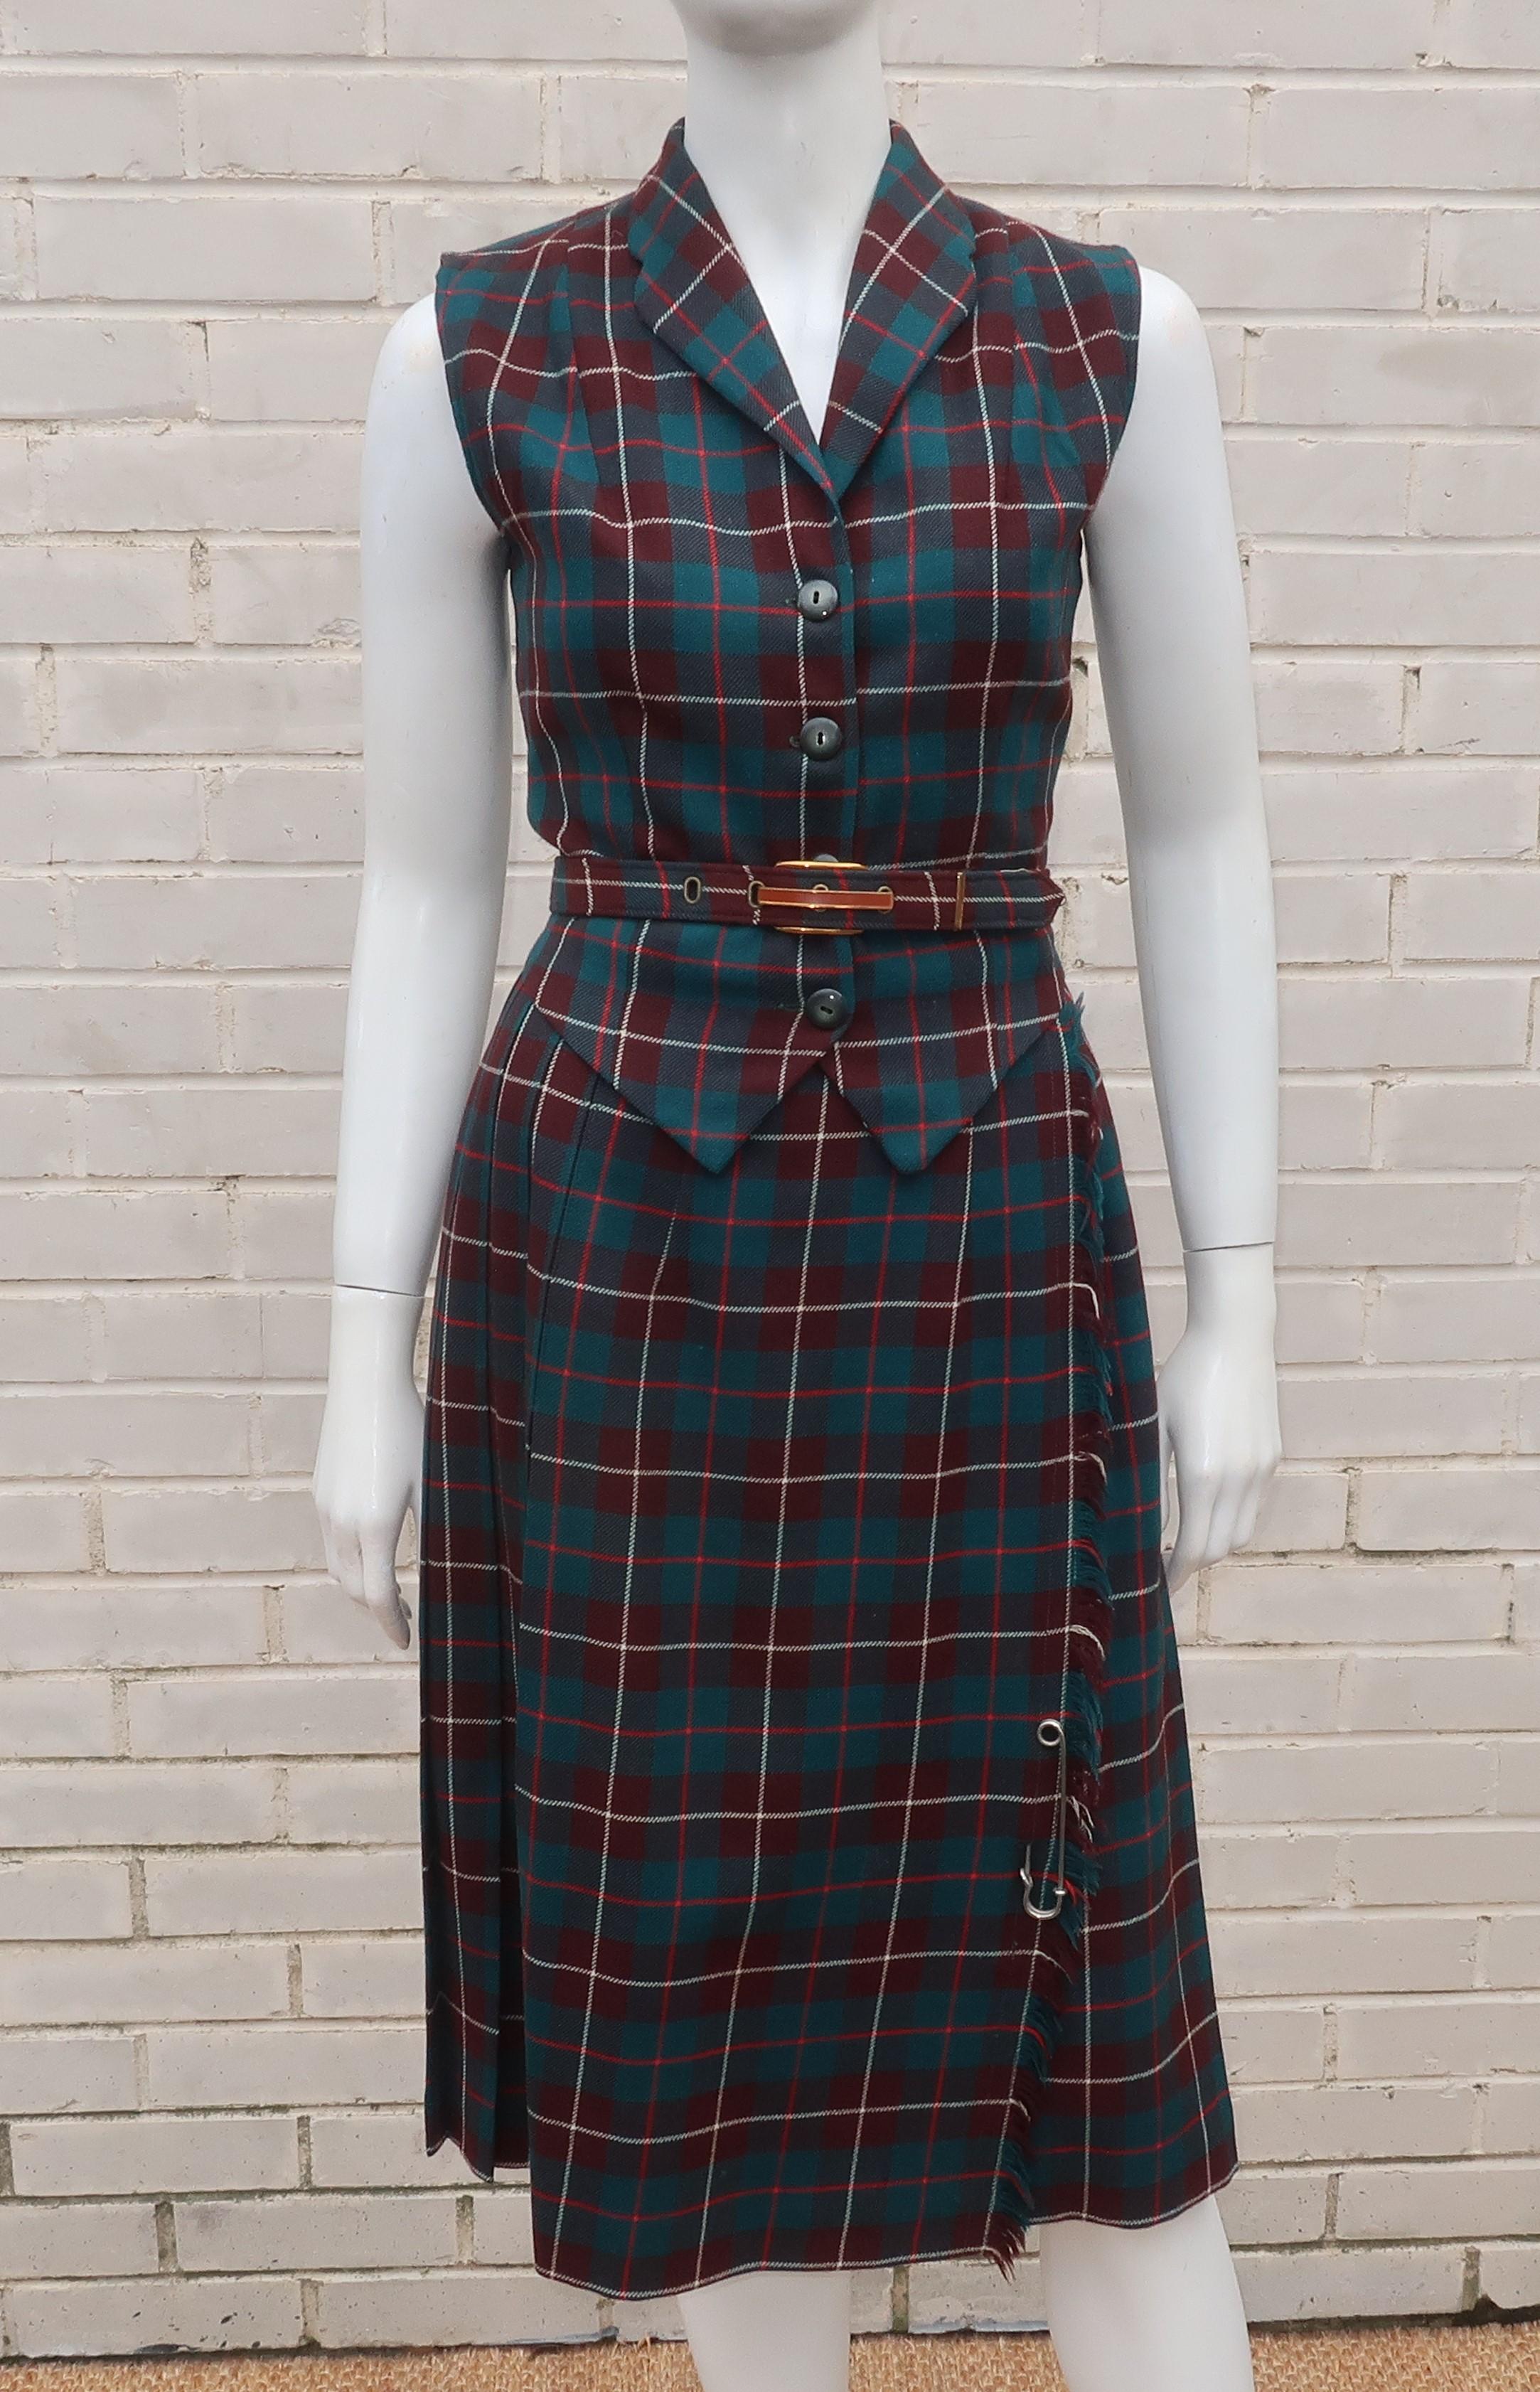 Get your tartan fix with this 1950's Clans of Scotland two piece vest and skirt in a wool plaid with shades of brown, teal green, red and white.  The slim fitting vest buttons at the front with an iridescent light brown lining and the classic